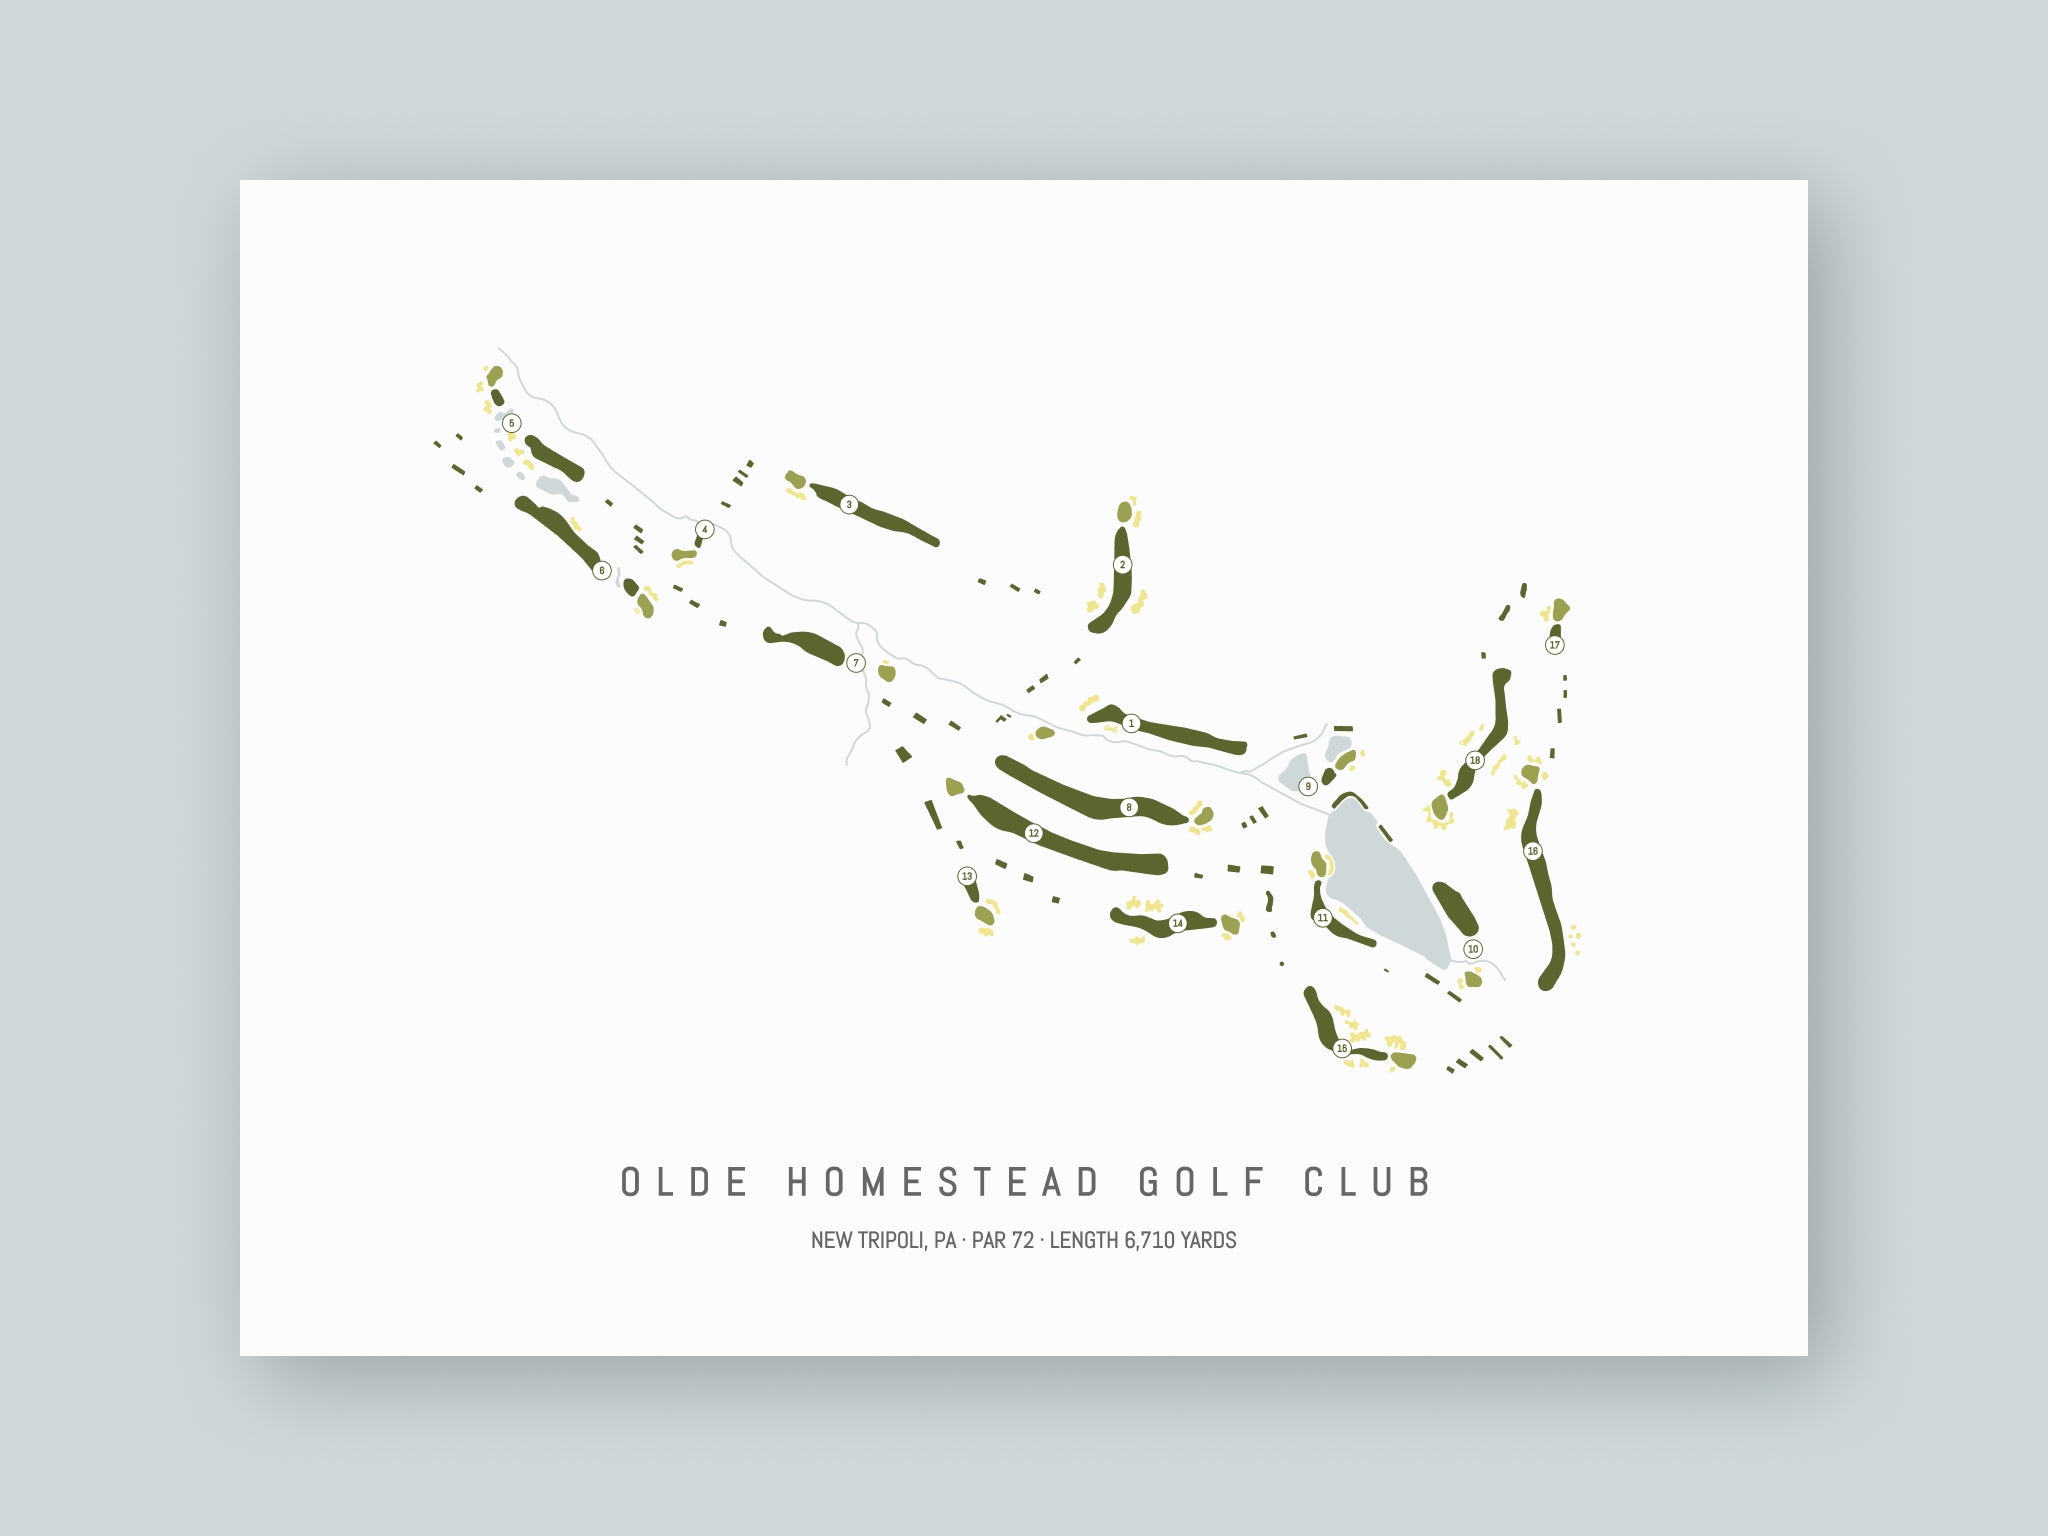 Olde-Homestead-Golf-Club-PA--Unframed-24x18-With-Hole-Numbers